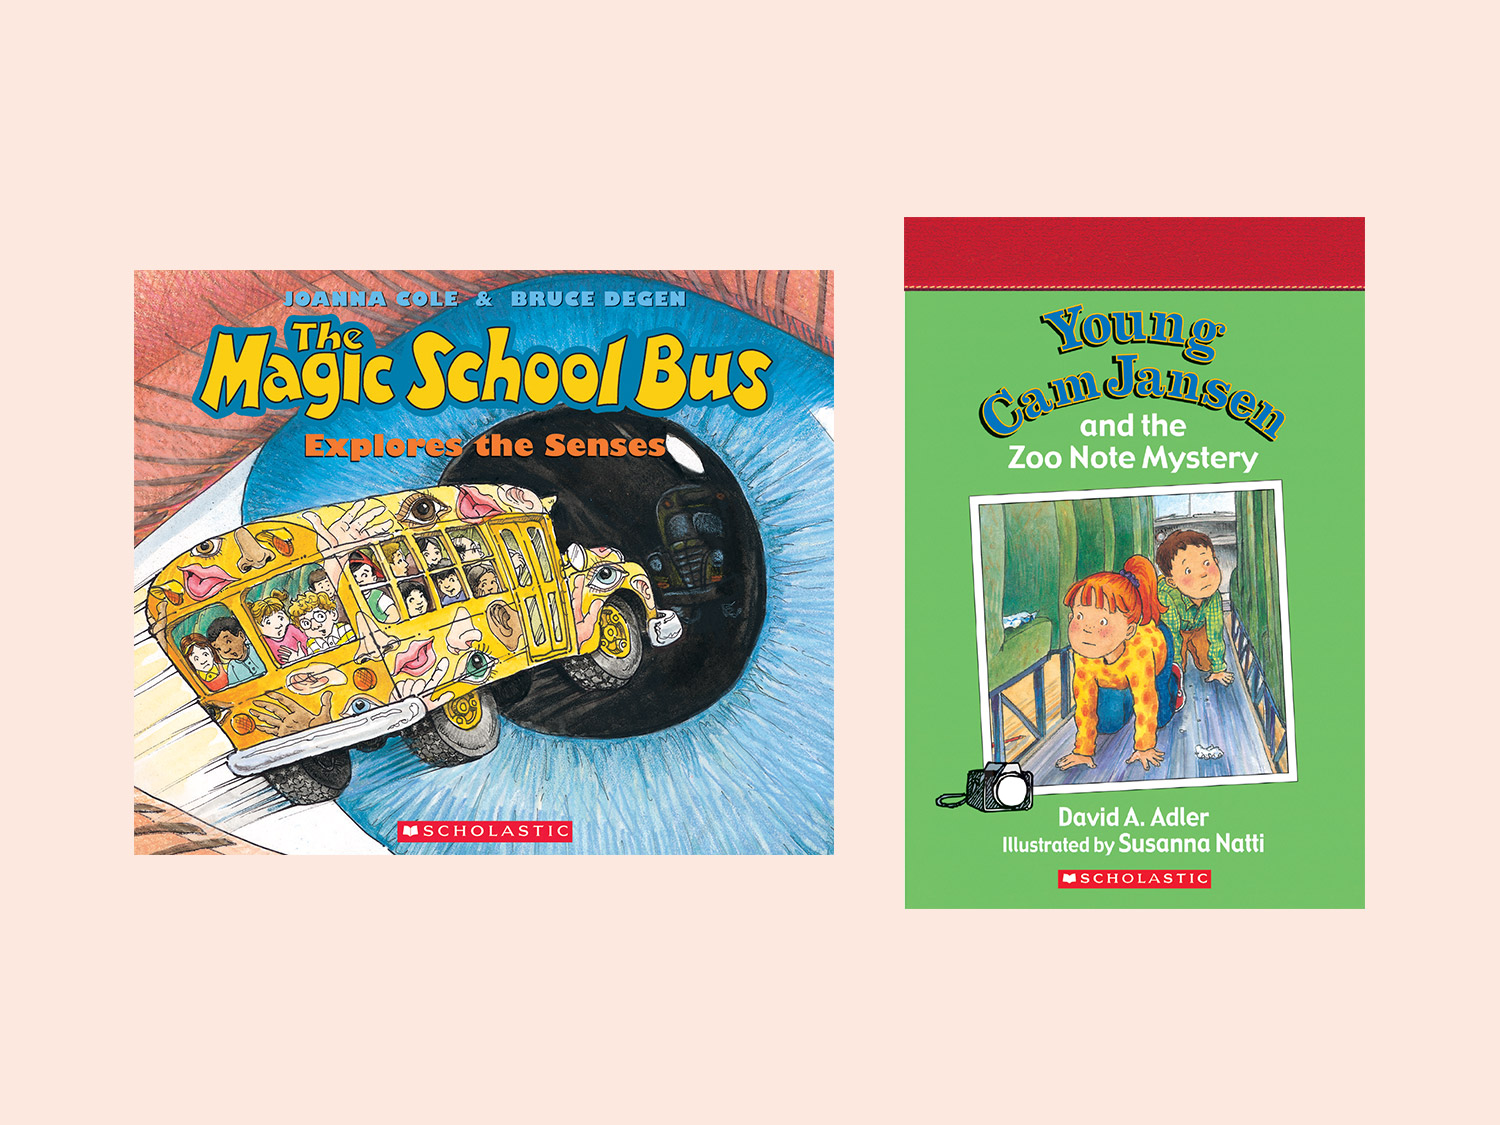 Books for 7 year olds  The School Reading List